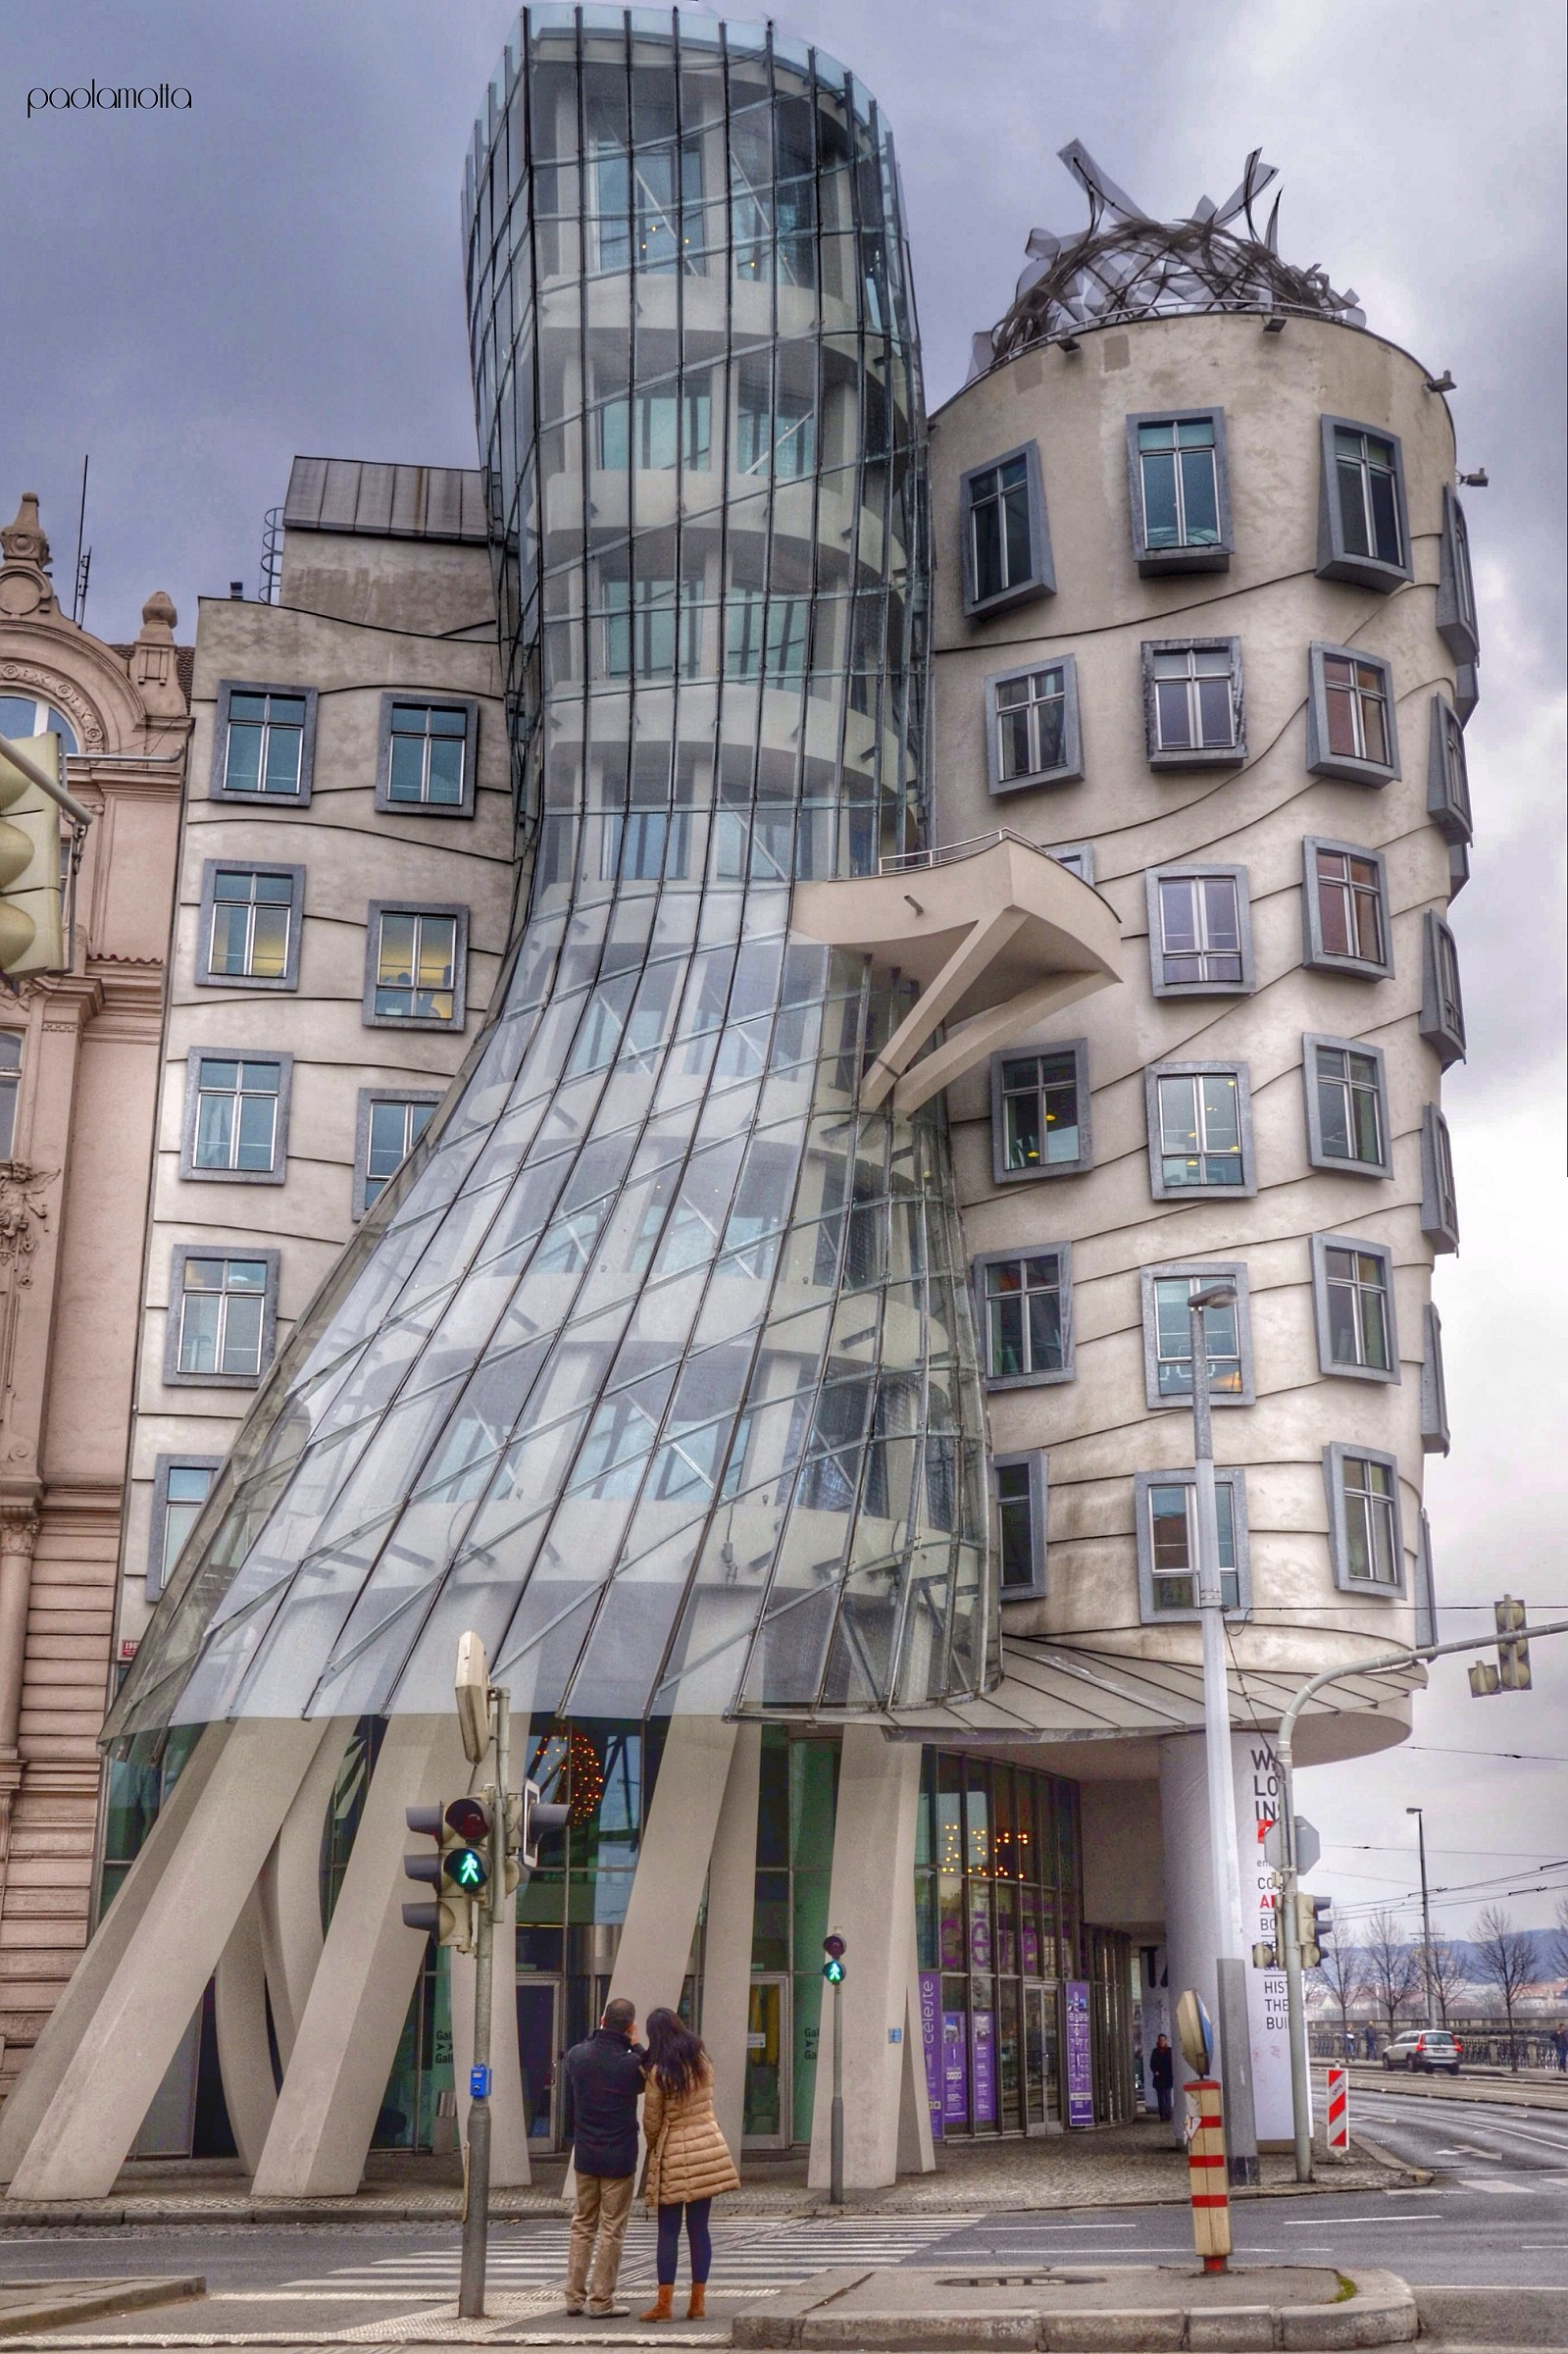 the dancing house...